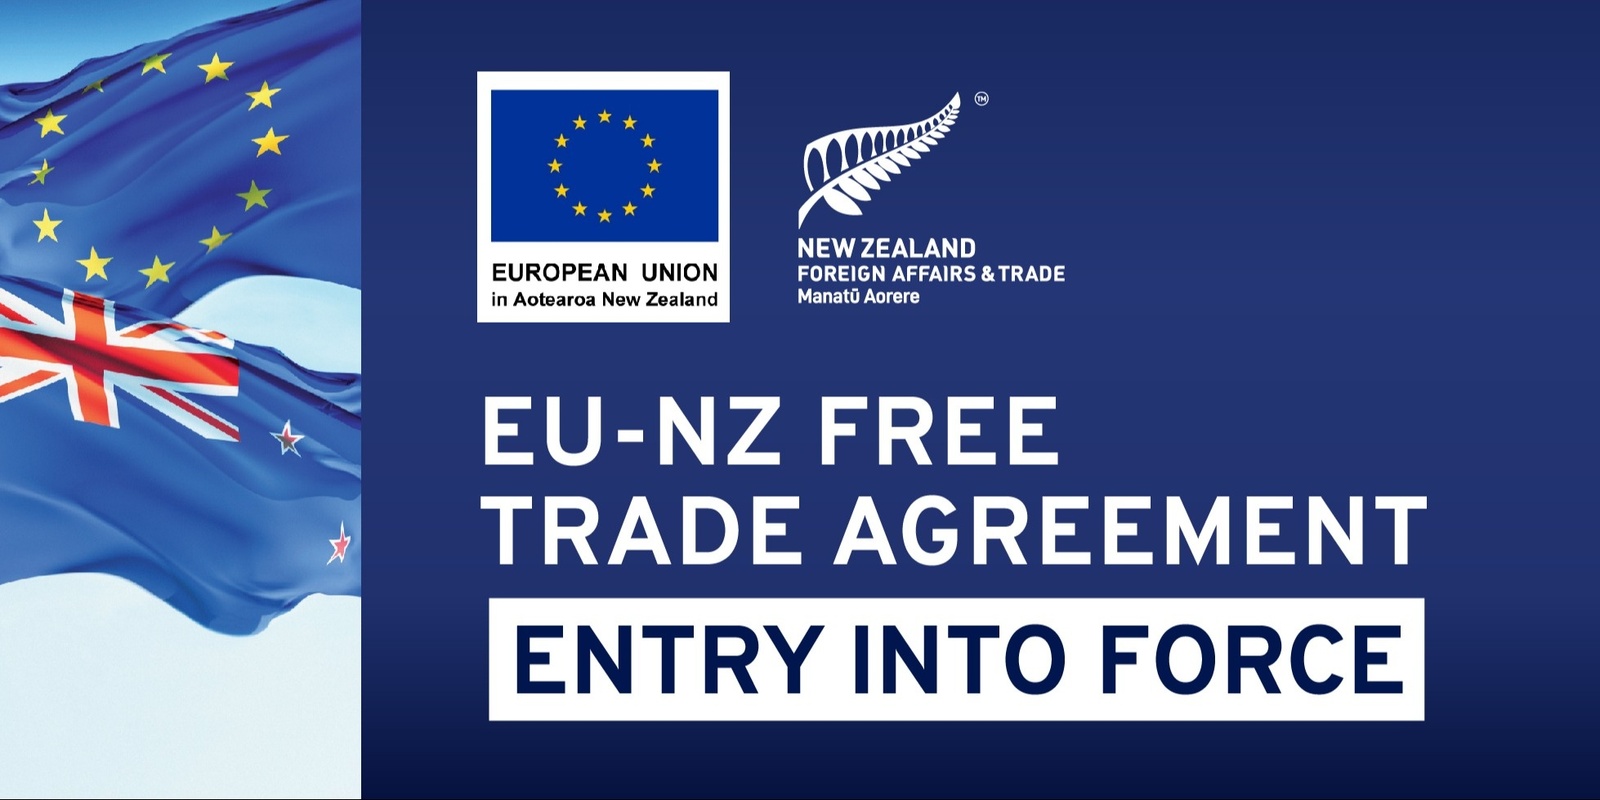 Banner image for Celebrate the EU-NZ Free Trade Agreement Entry into Force